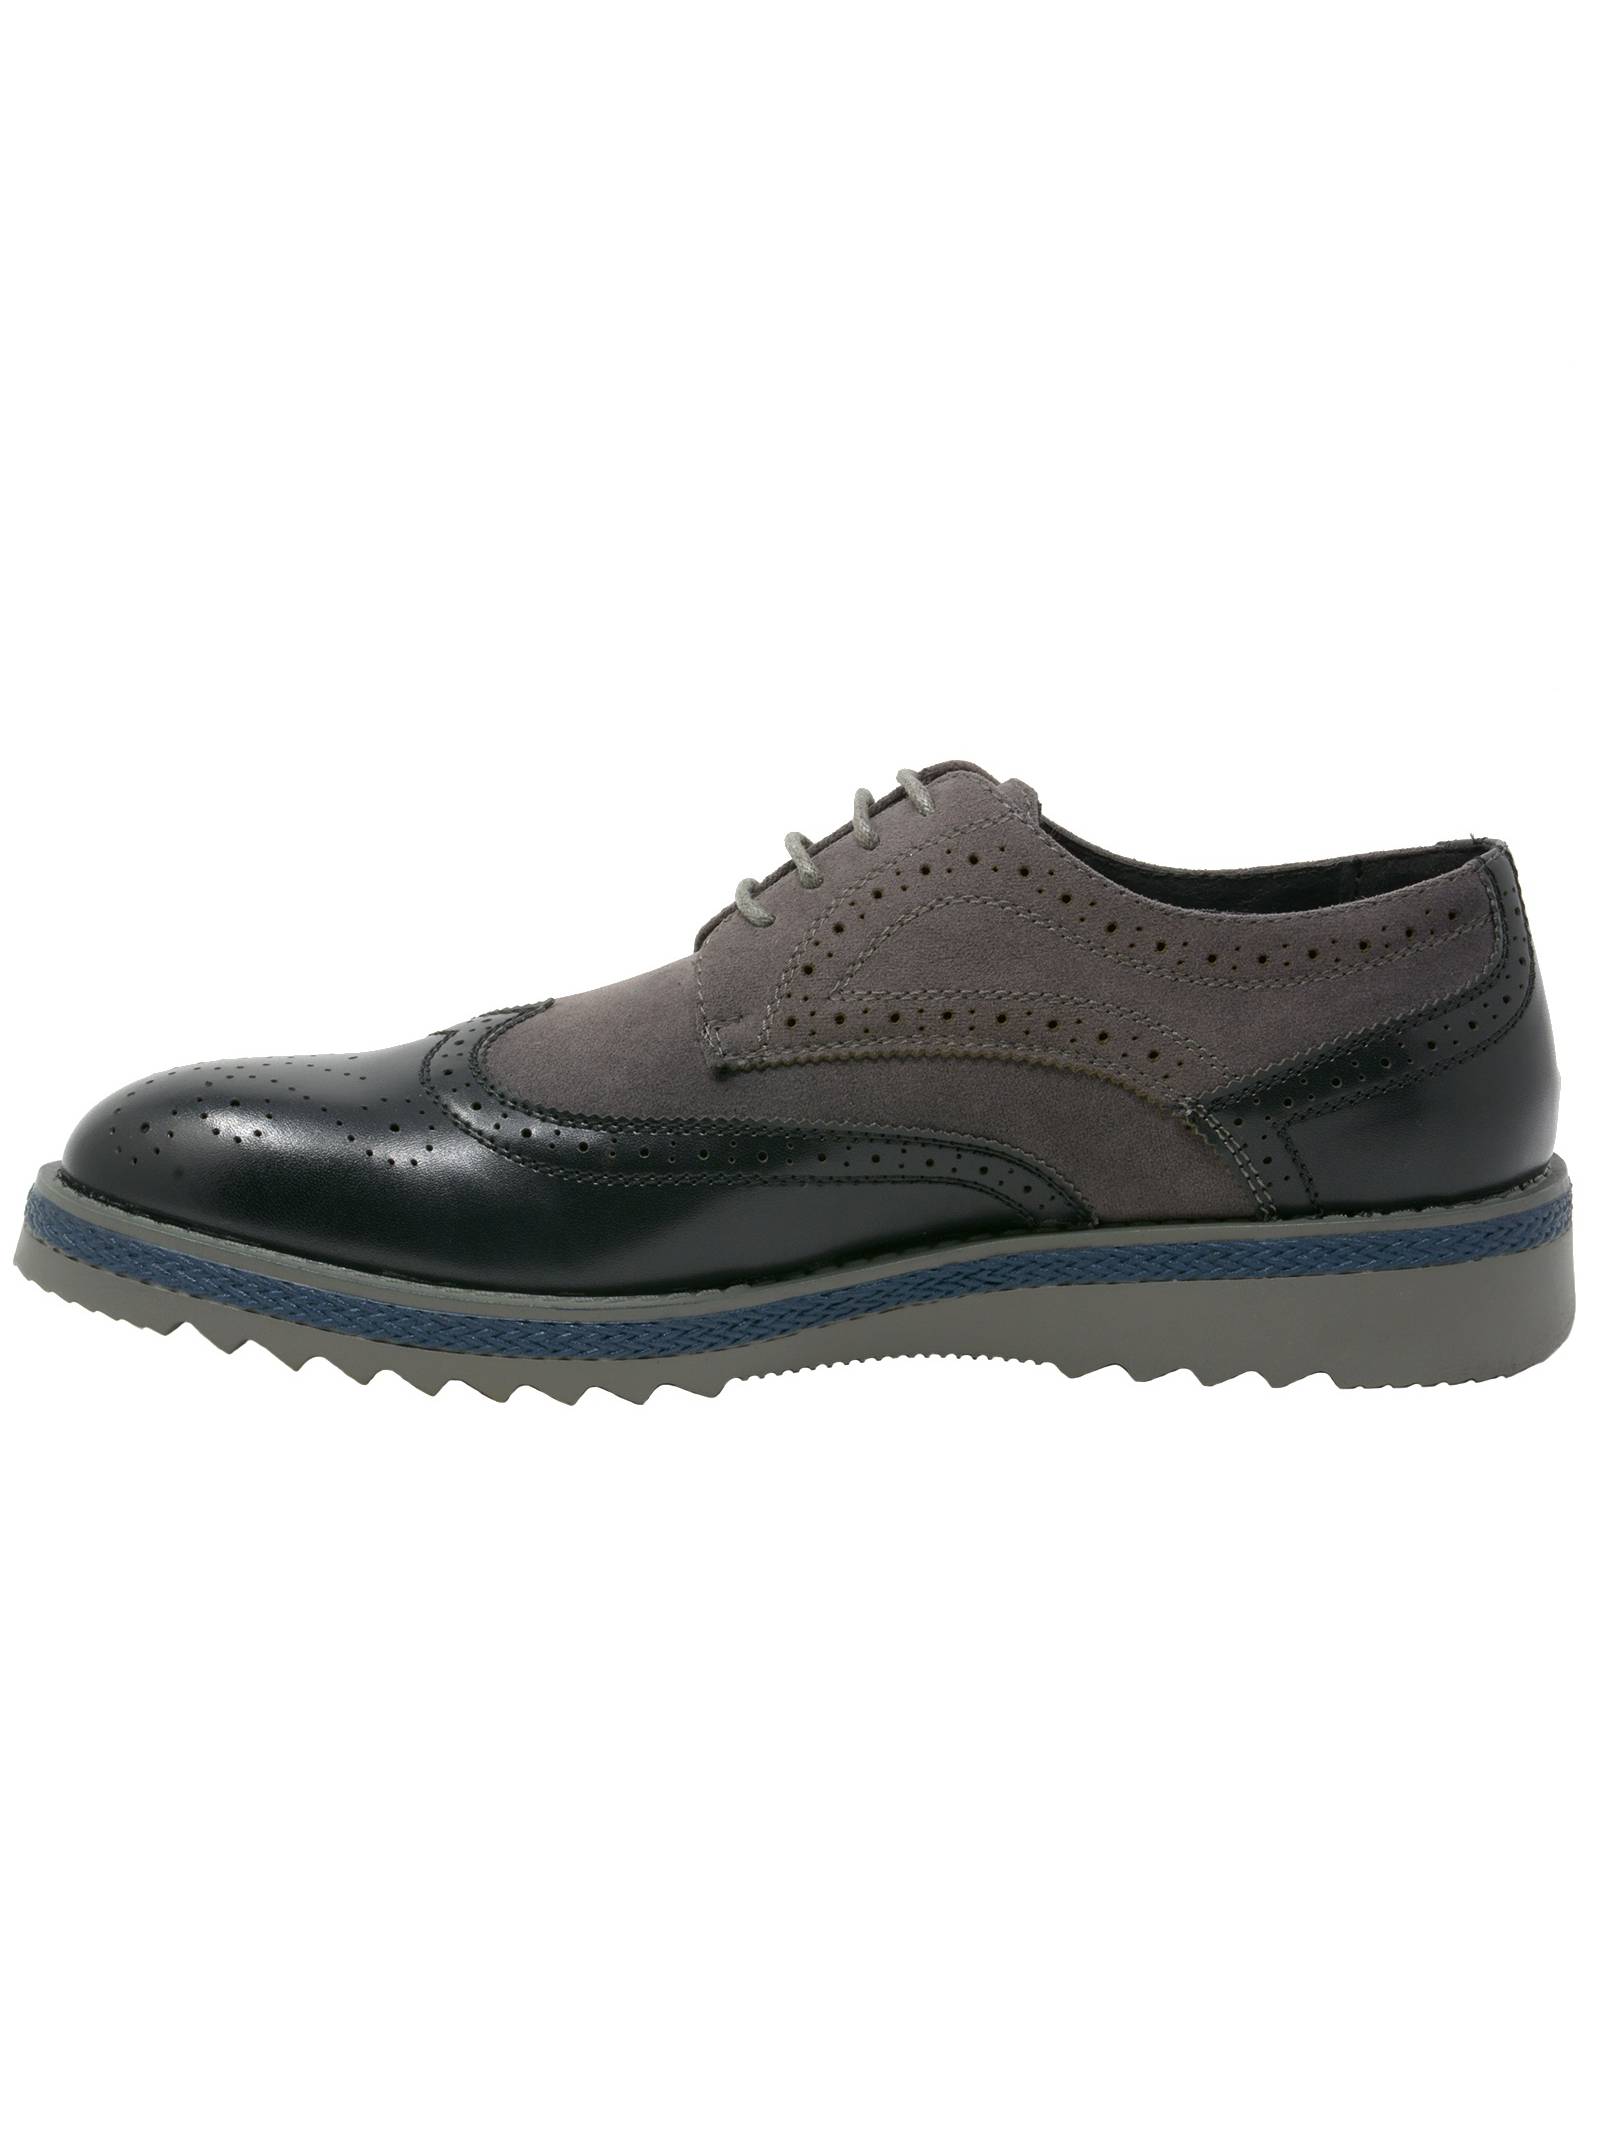 Alpine Swiss Alec Mens Wingtip Shoes 1.5” Ripple Sole Leather Insole & Lining - image 5 of 7